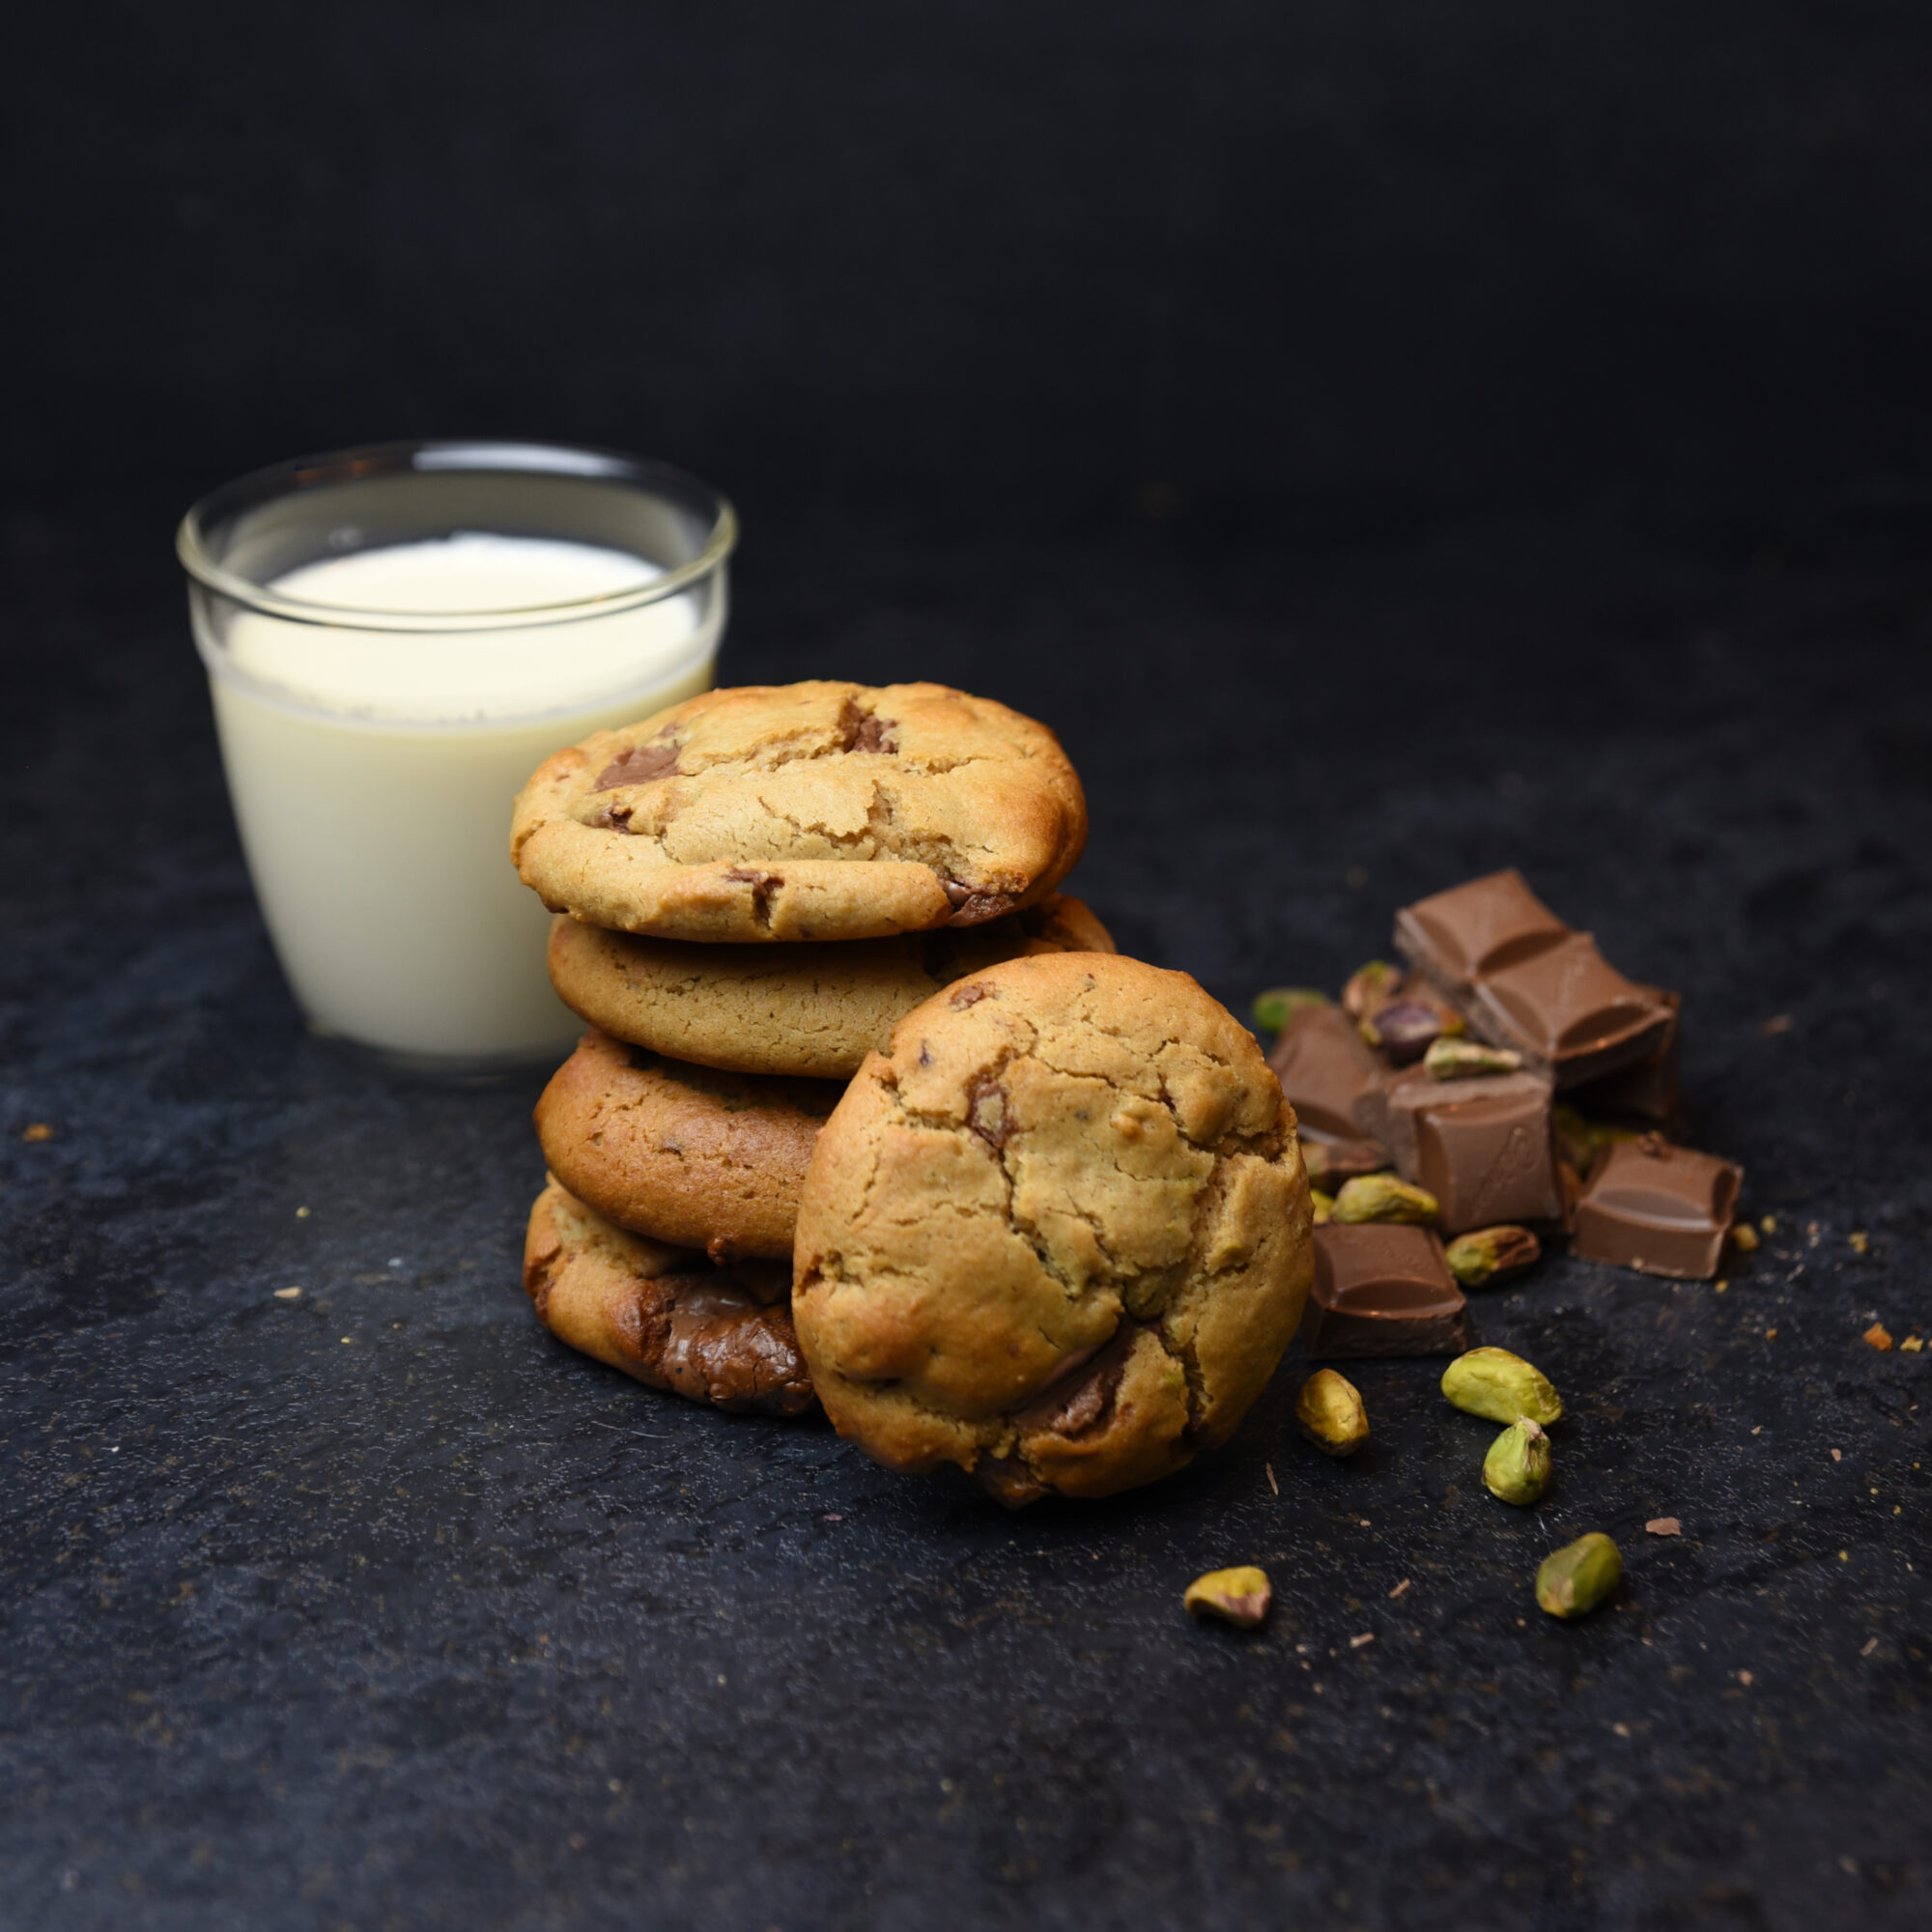 Warm chocolate chunks, nutty tahini flavour and chopped pistachios in a fresh home-made biscuit